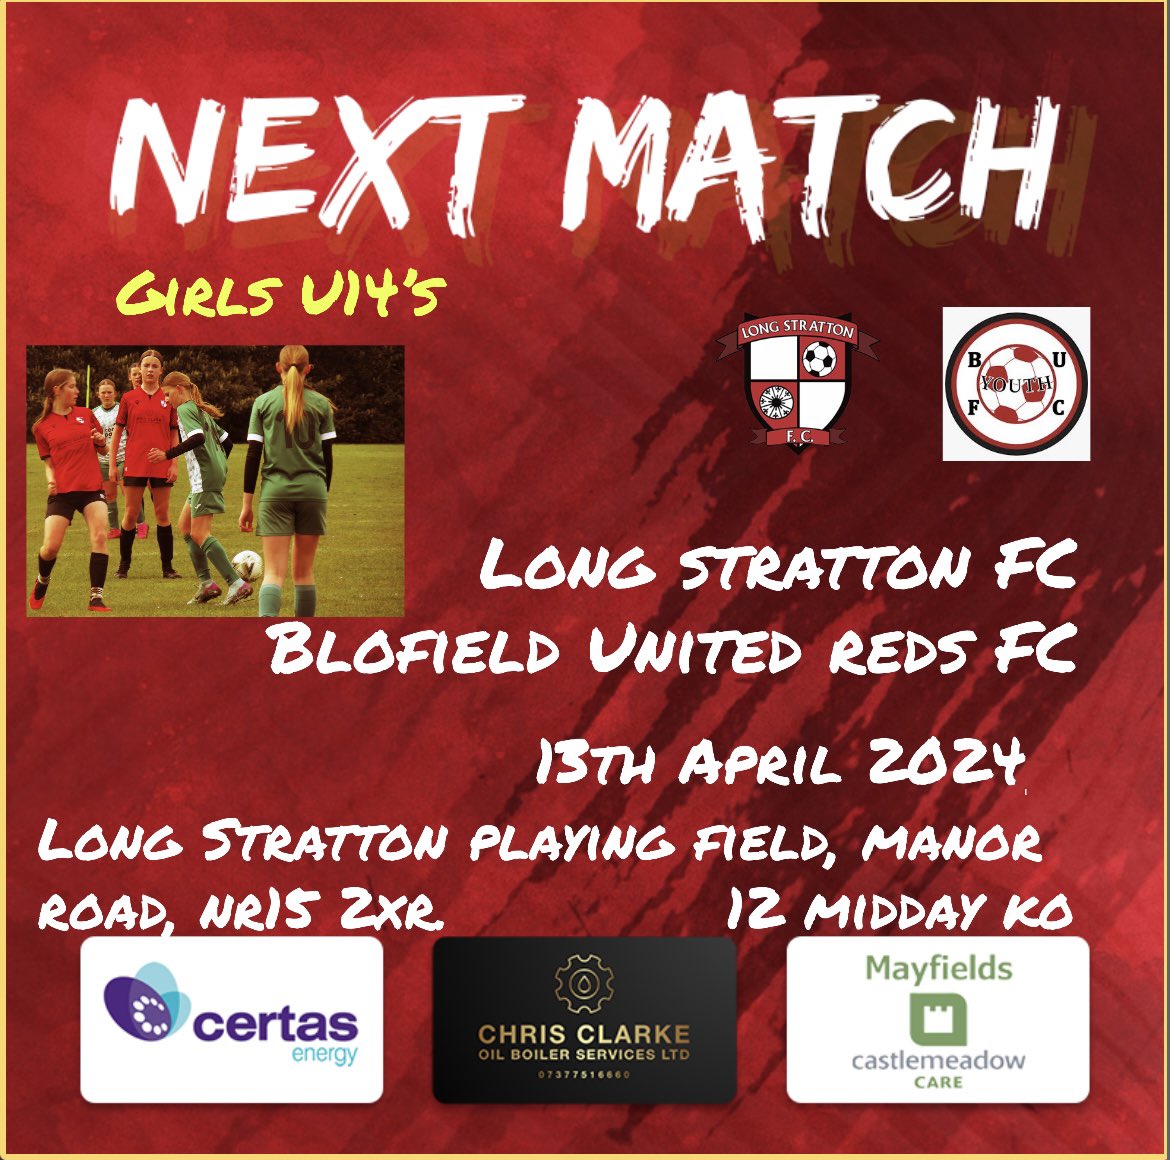 Penultimate matchday for the girls!! Come down and support them!! (First posting of this had incorrect location 🤦🏼‍♀️)